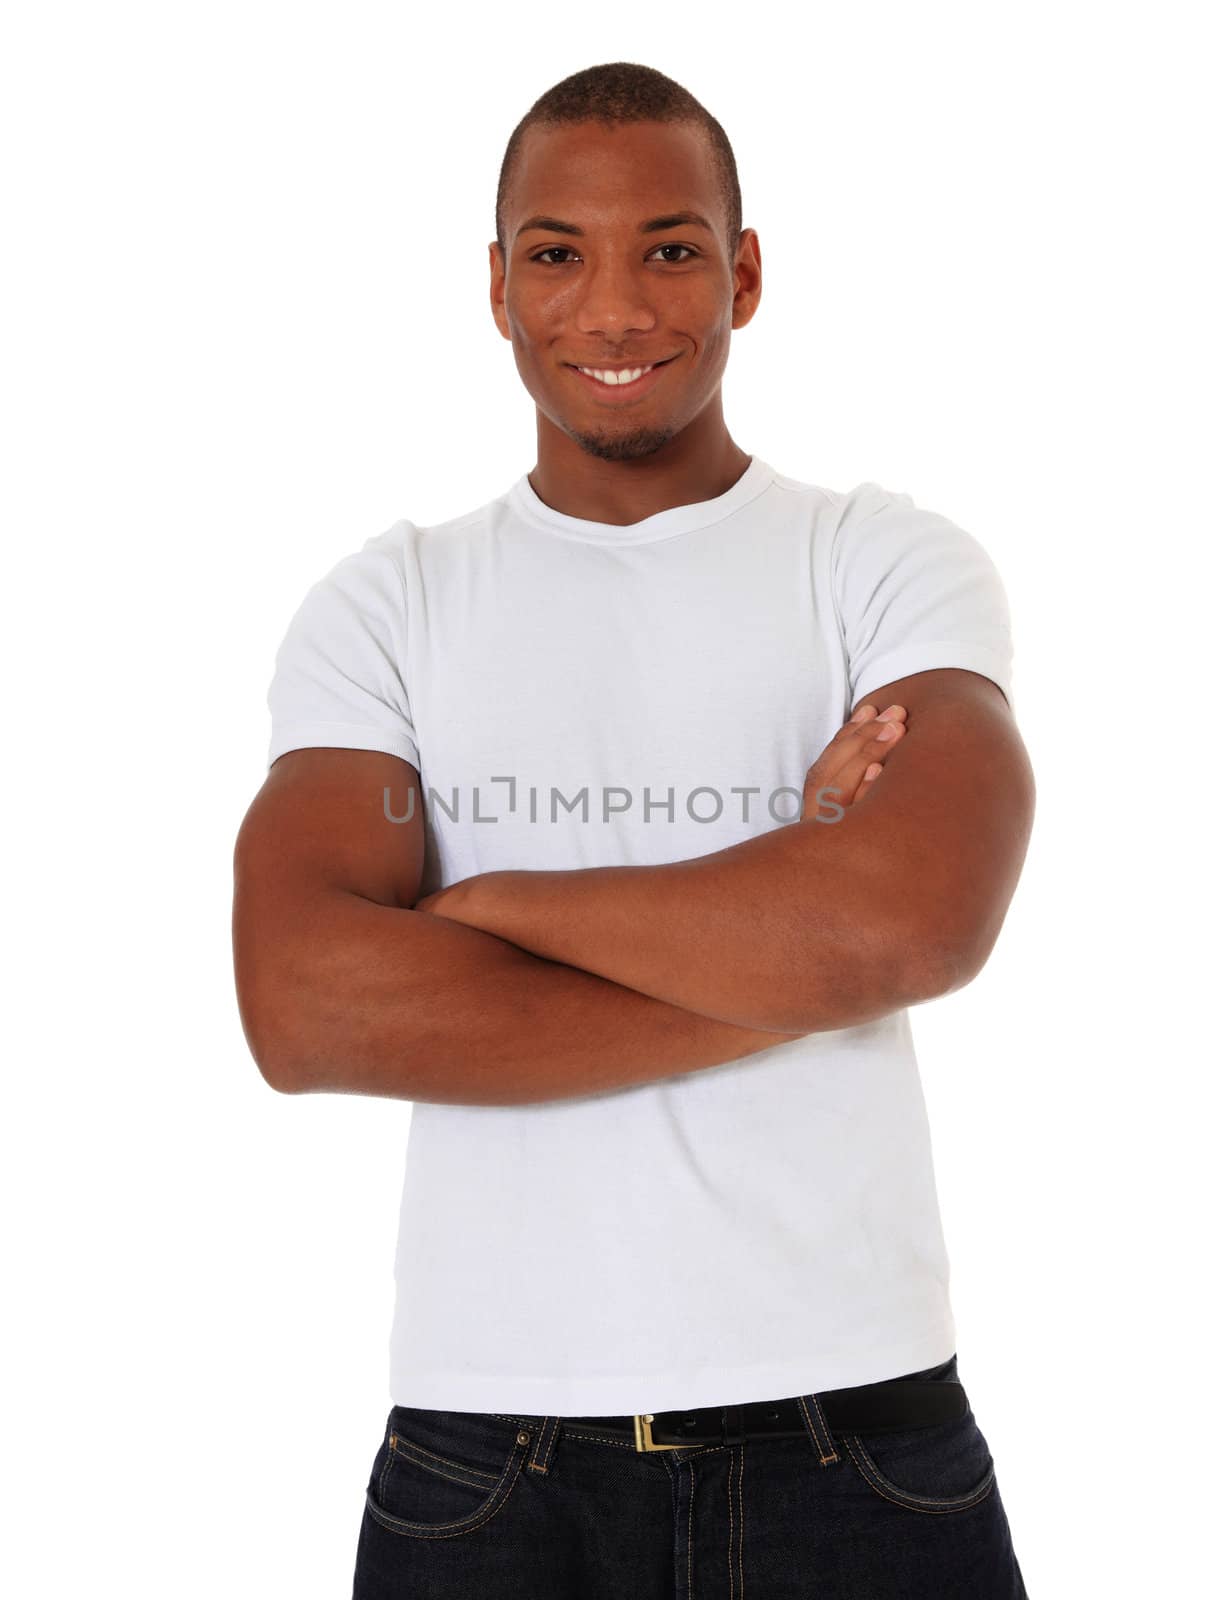 Attractive black man. All on white background.